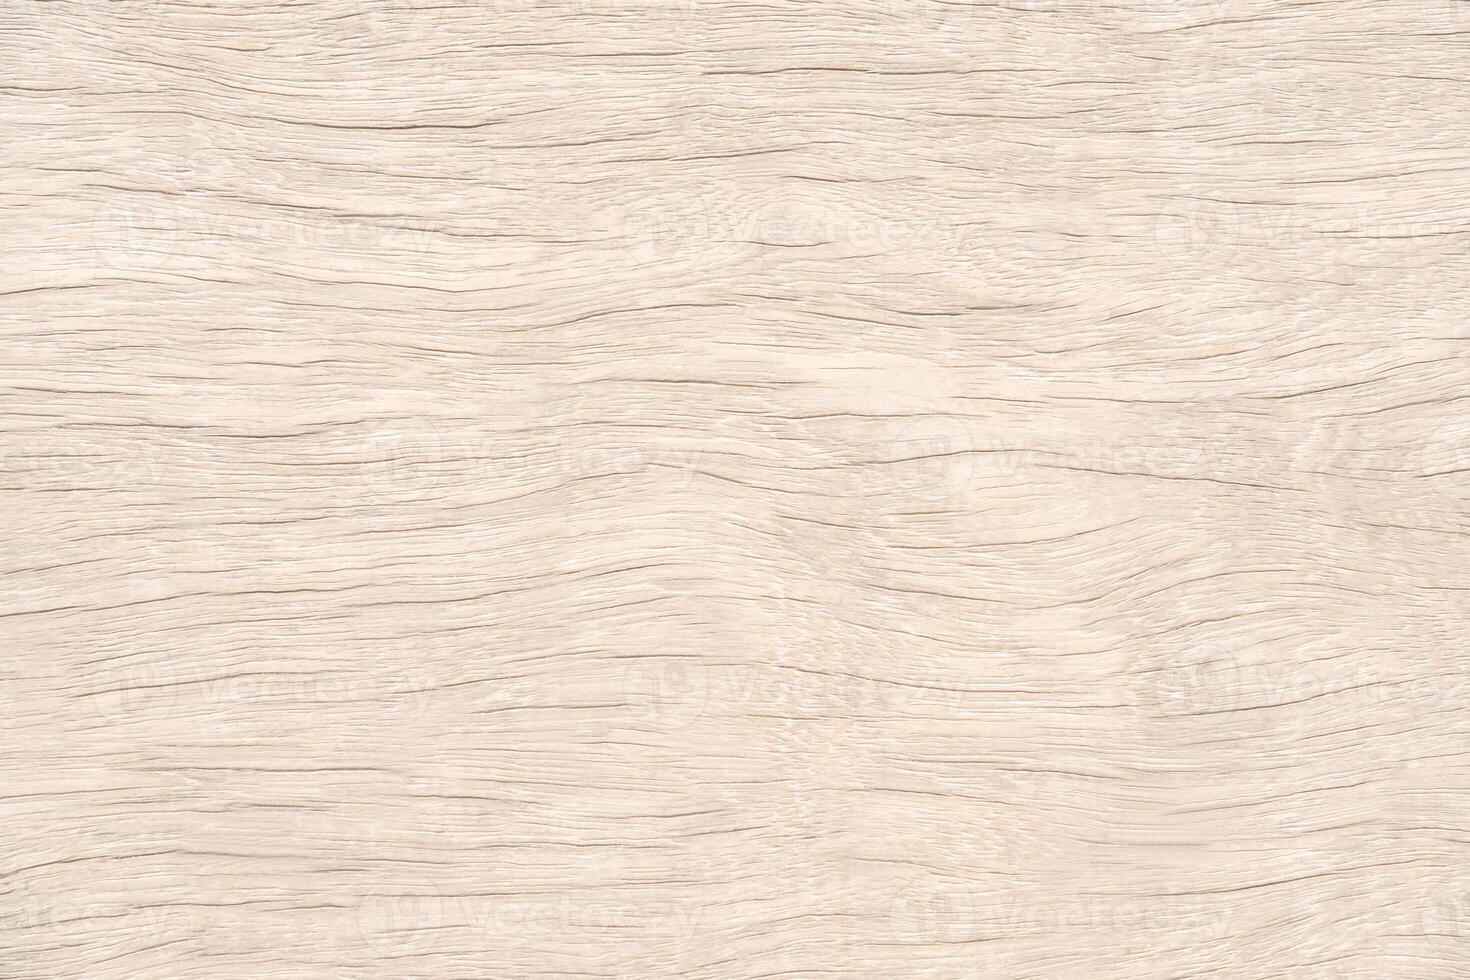 Light brown wood there are stains on the surface for background texture and copy space photo